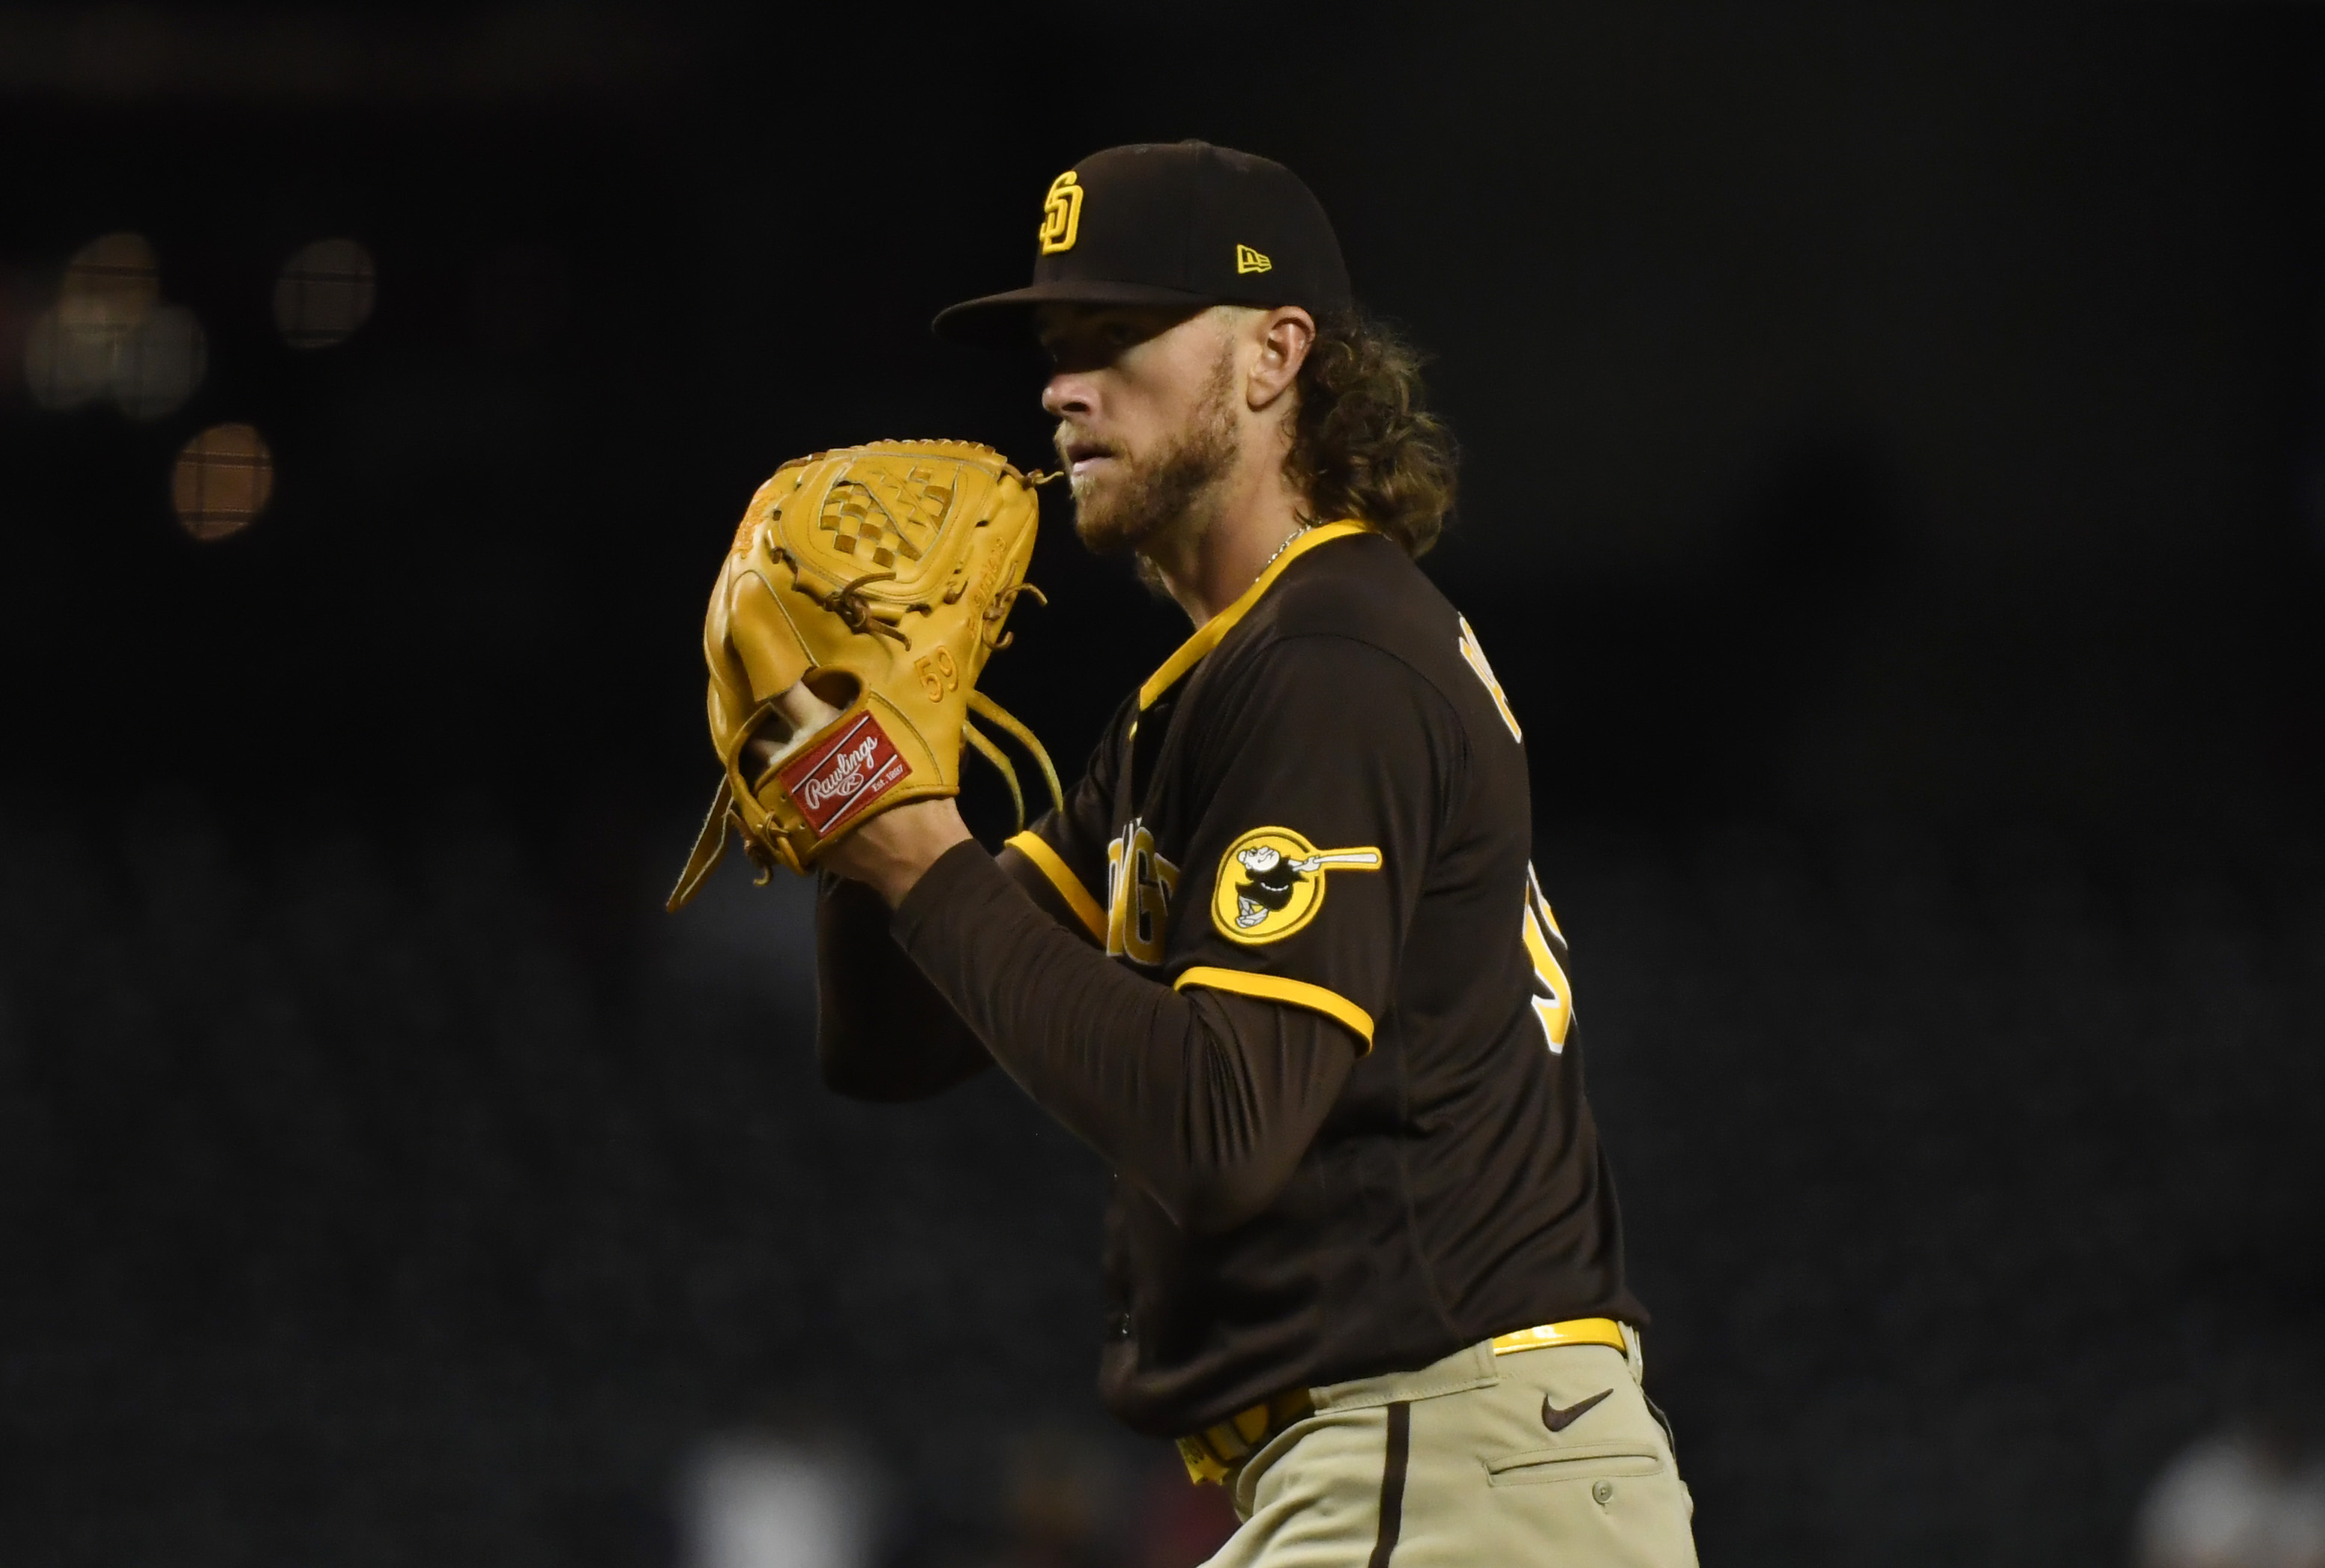 Chris Paddack, Emilio Pagan Reportedly Traded from Padres to Twins